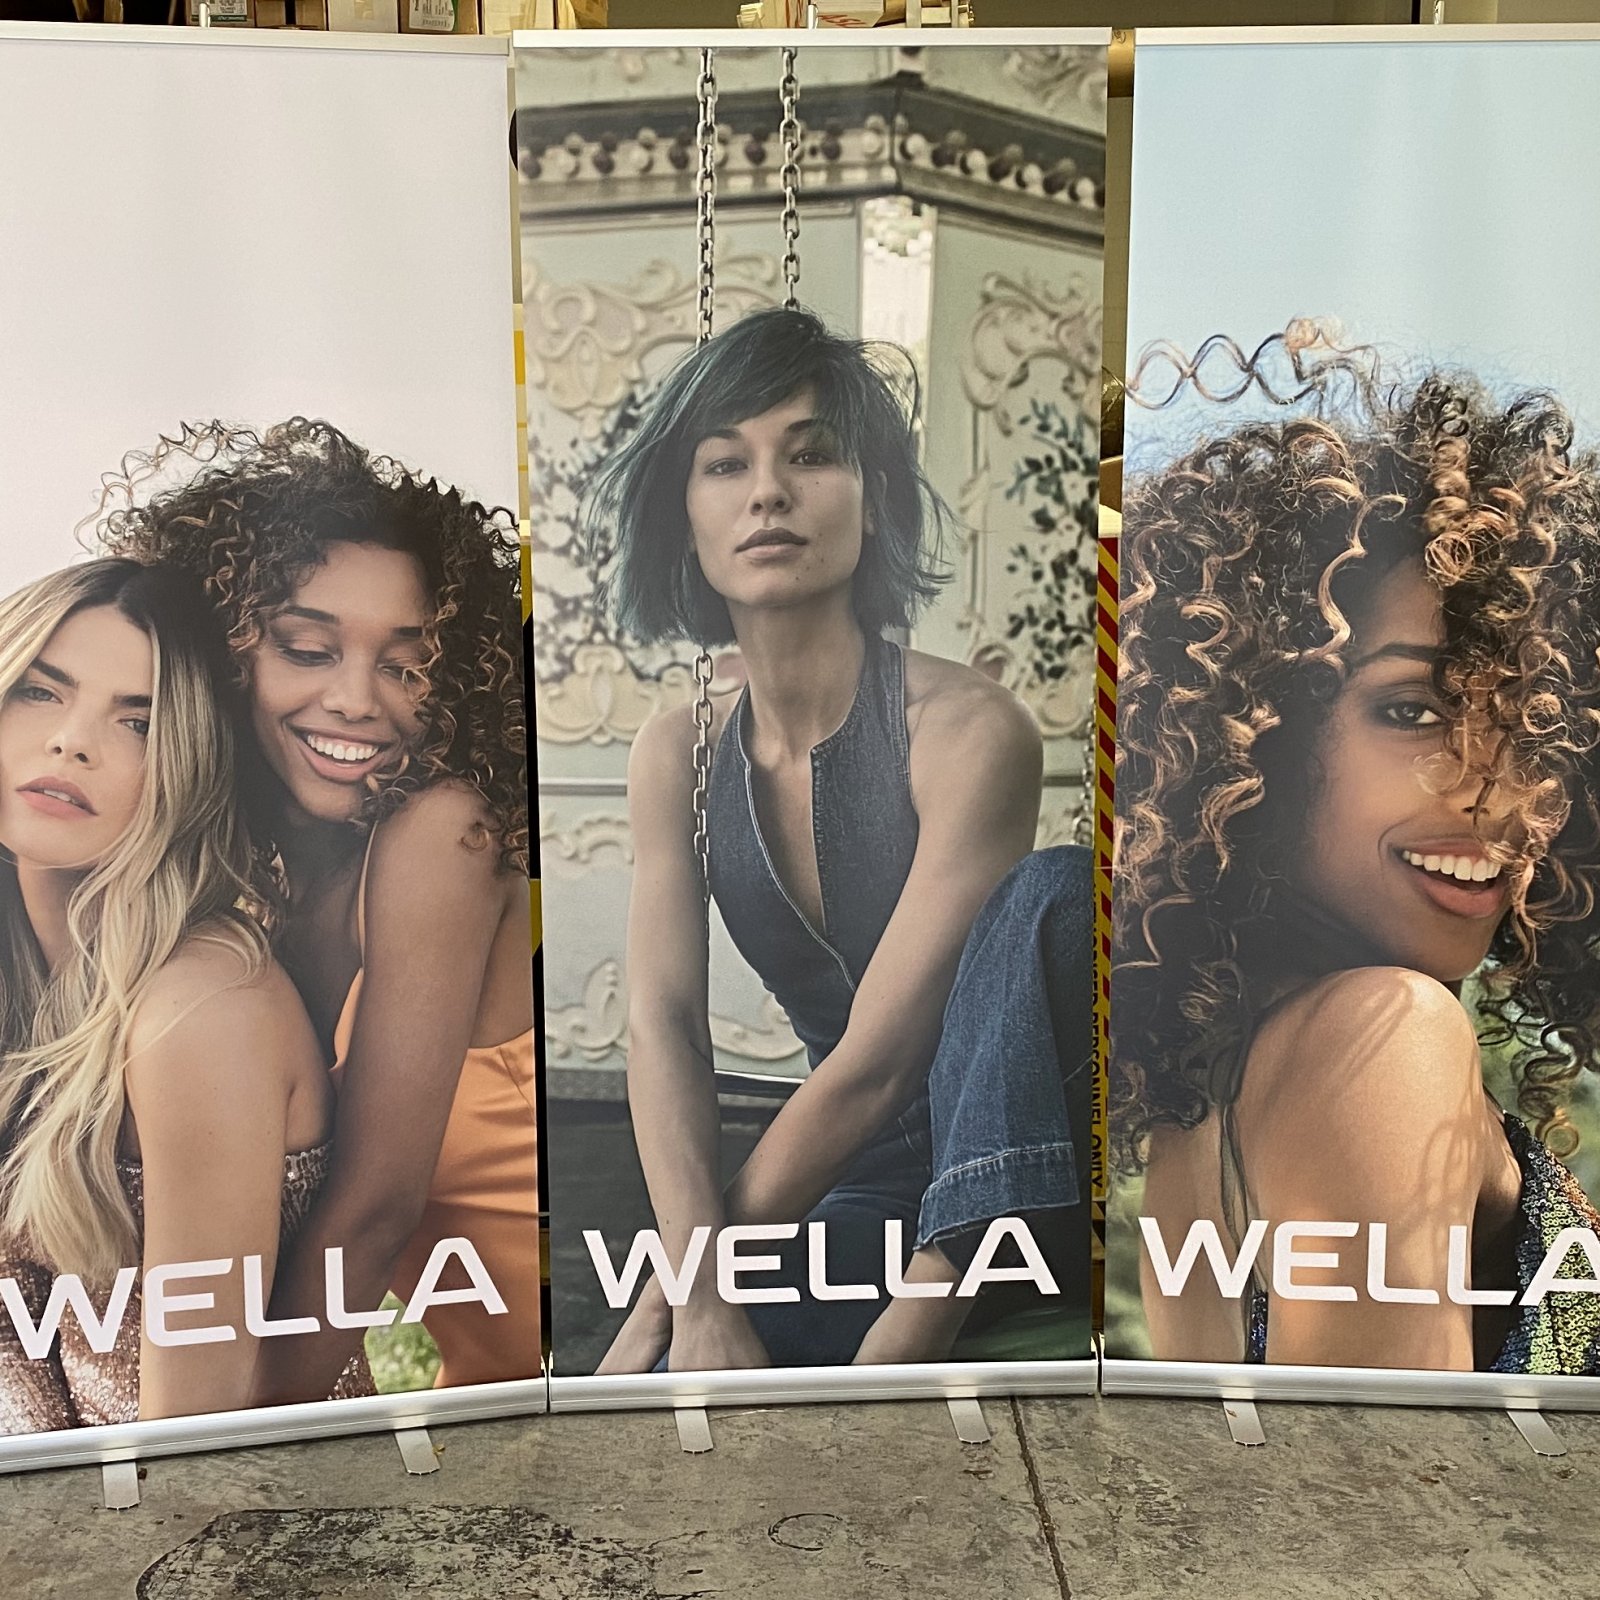 Wella Pull Up Banners